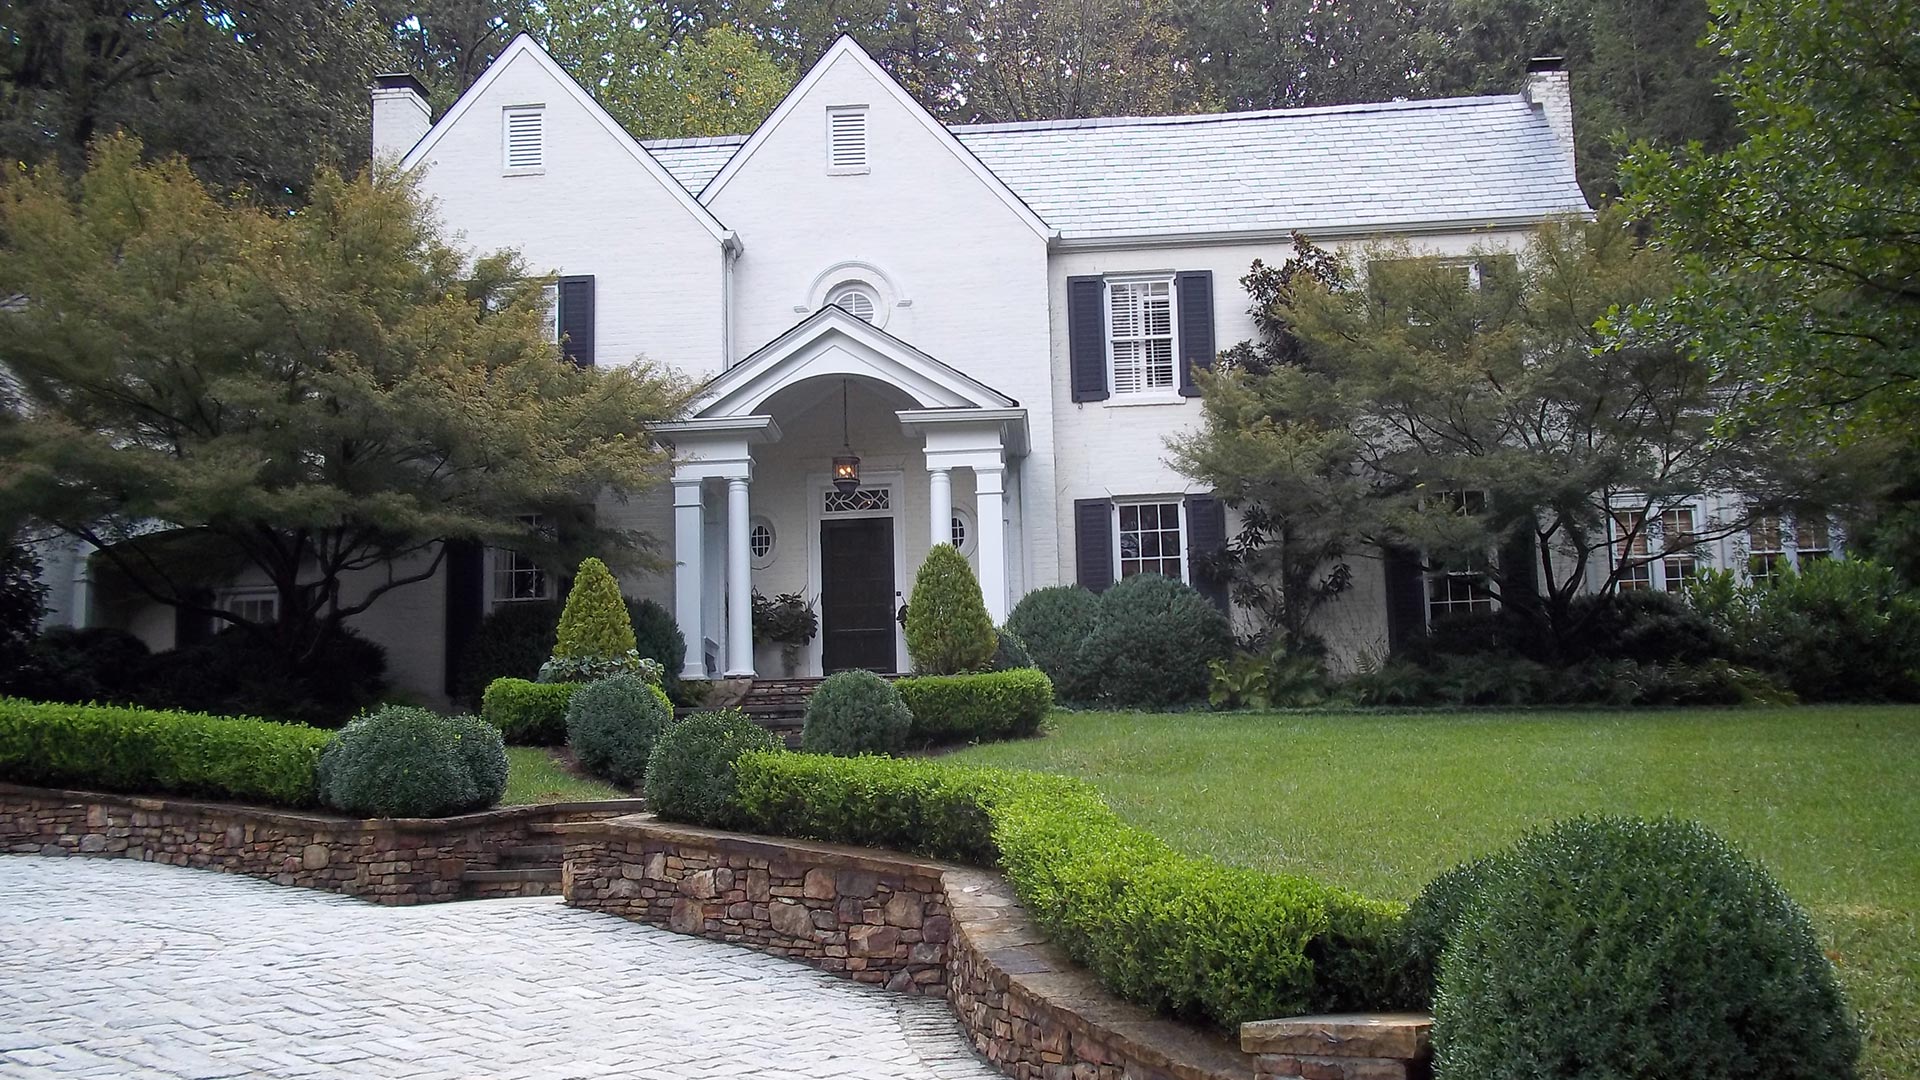 A home with full-service landscaping and lawn care in Peachtree Hills, GA.